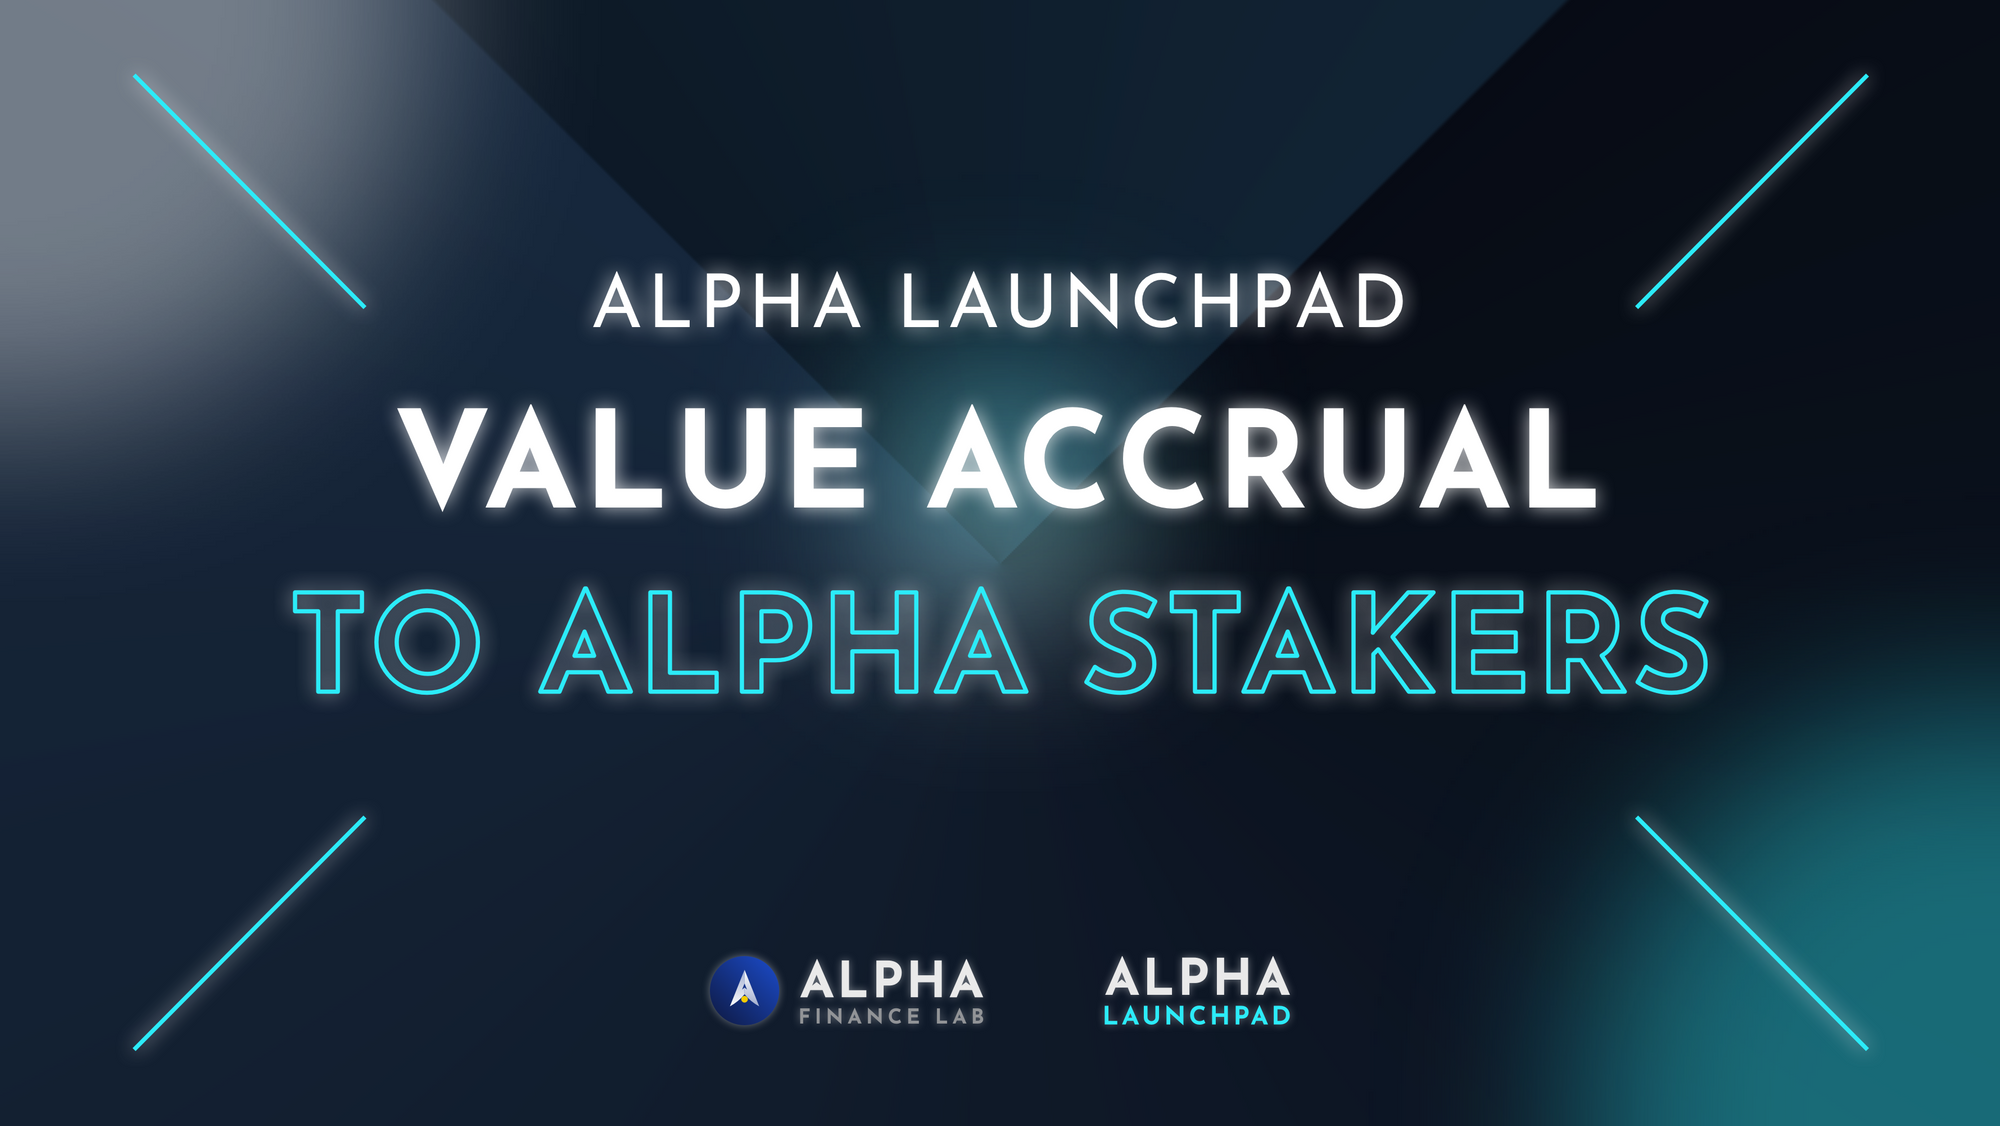 Alpha Launchpad: Value Accrual to ALPHA Stakers